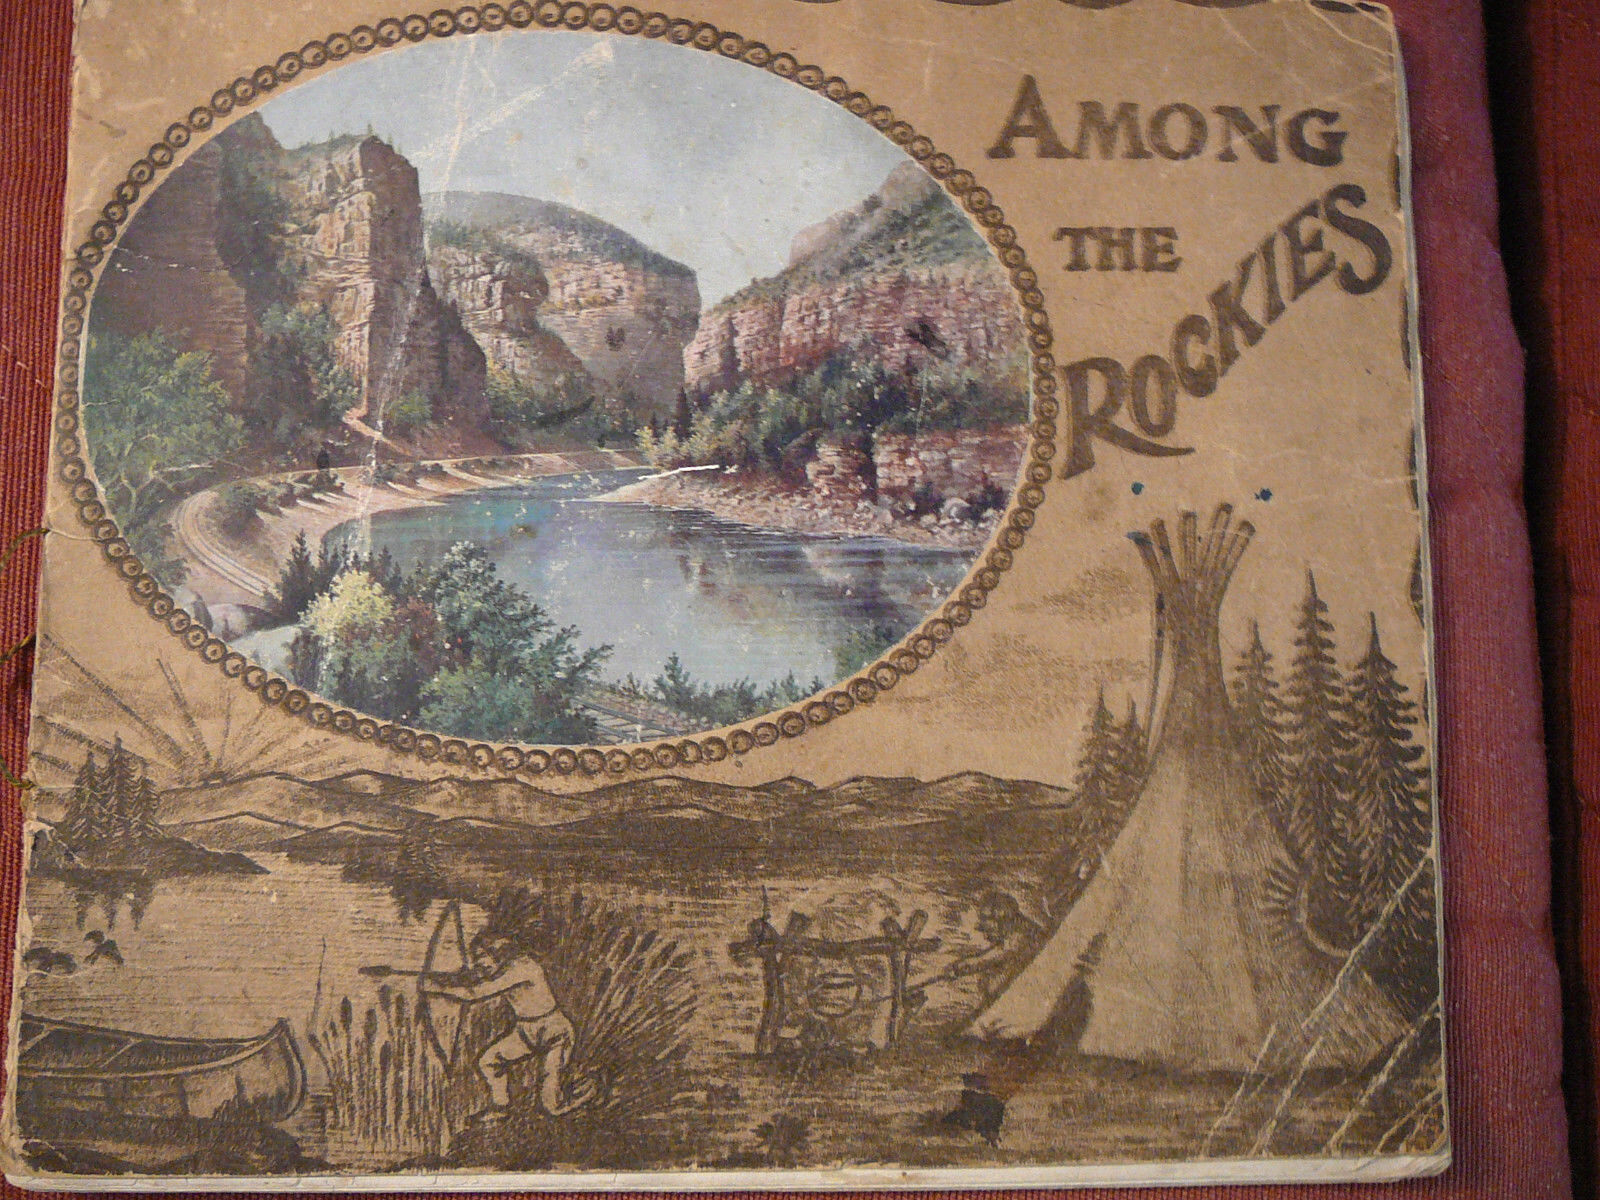 Among the Rockies - 1905 picture book; travel; Colorado